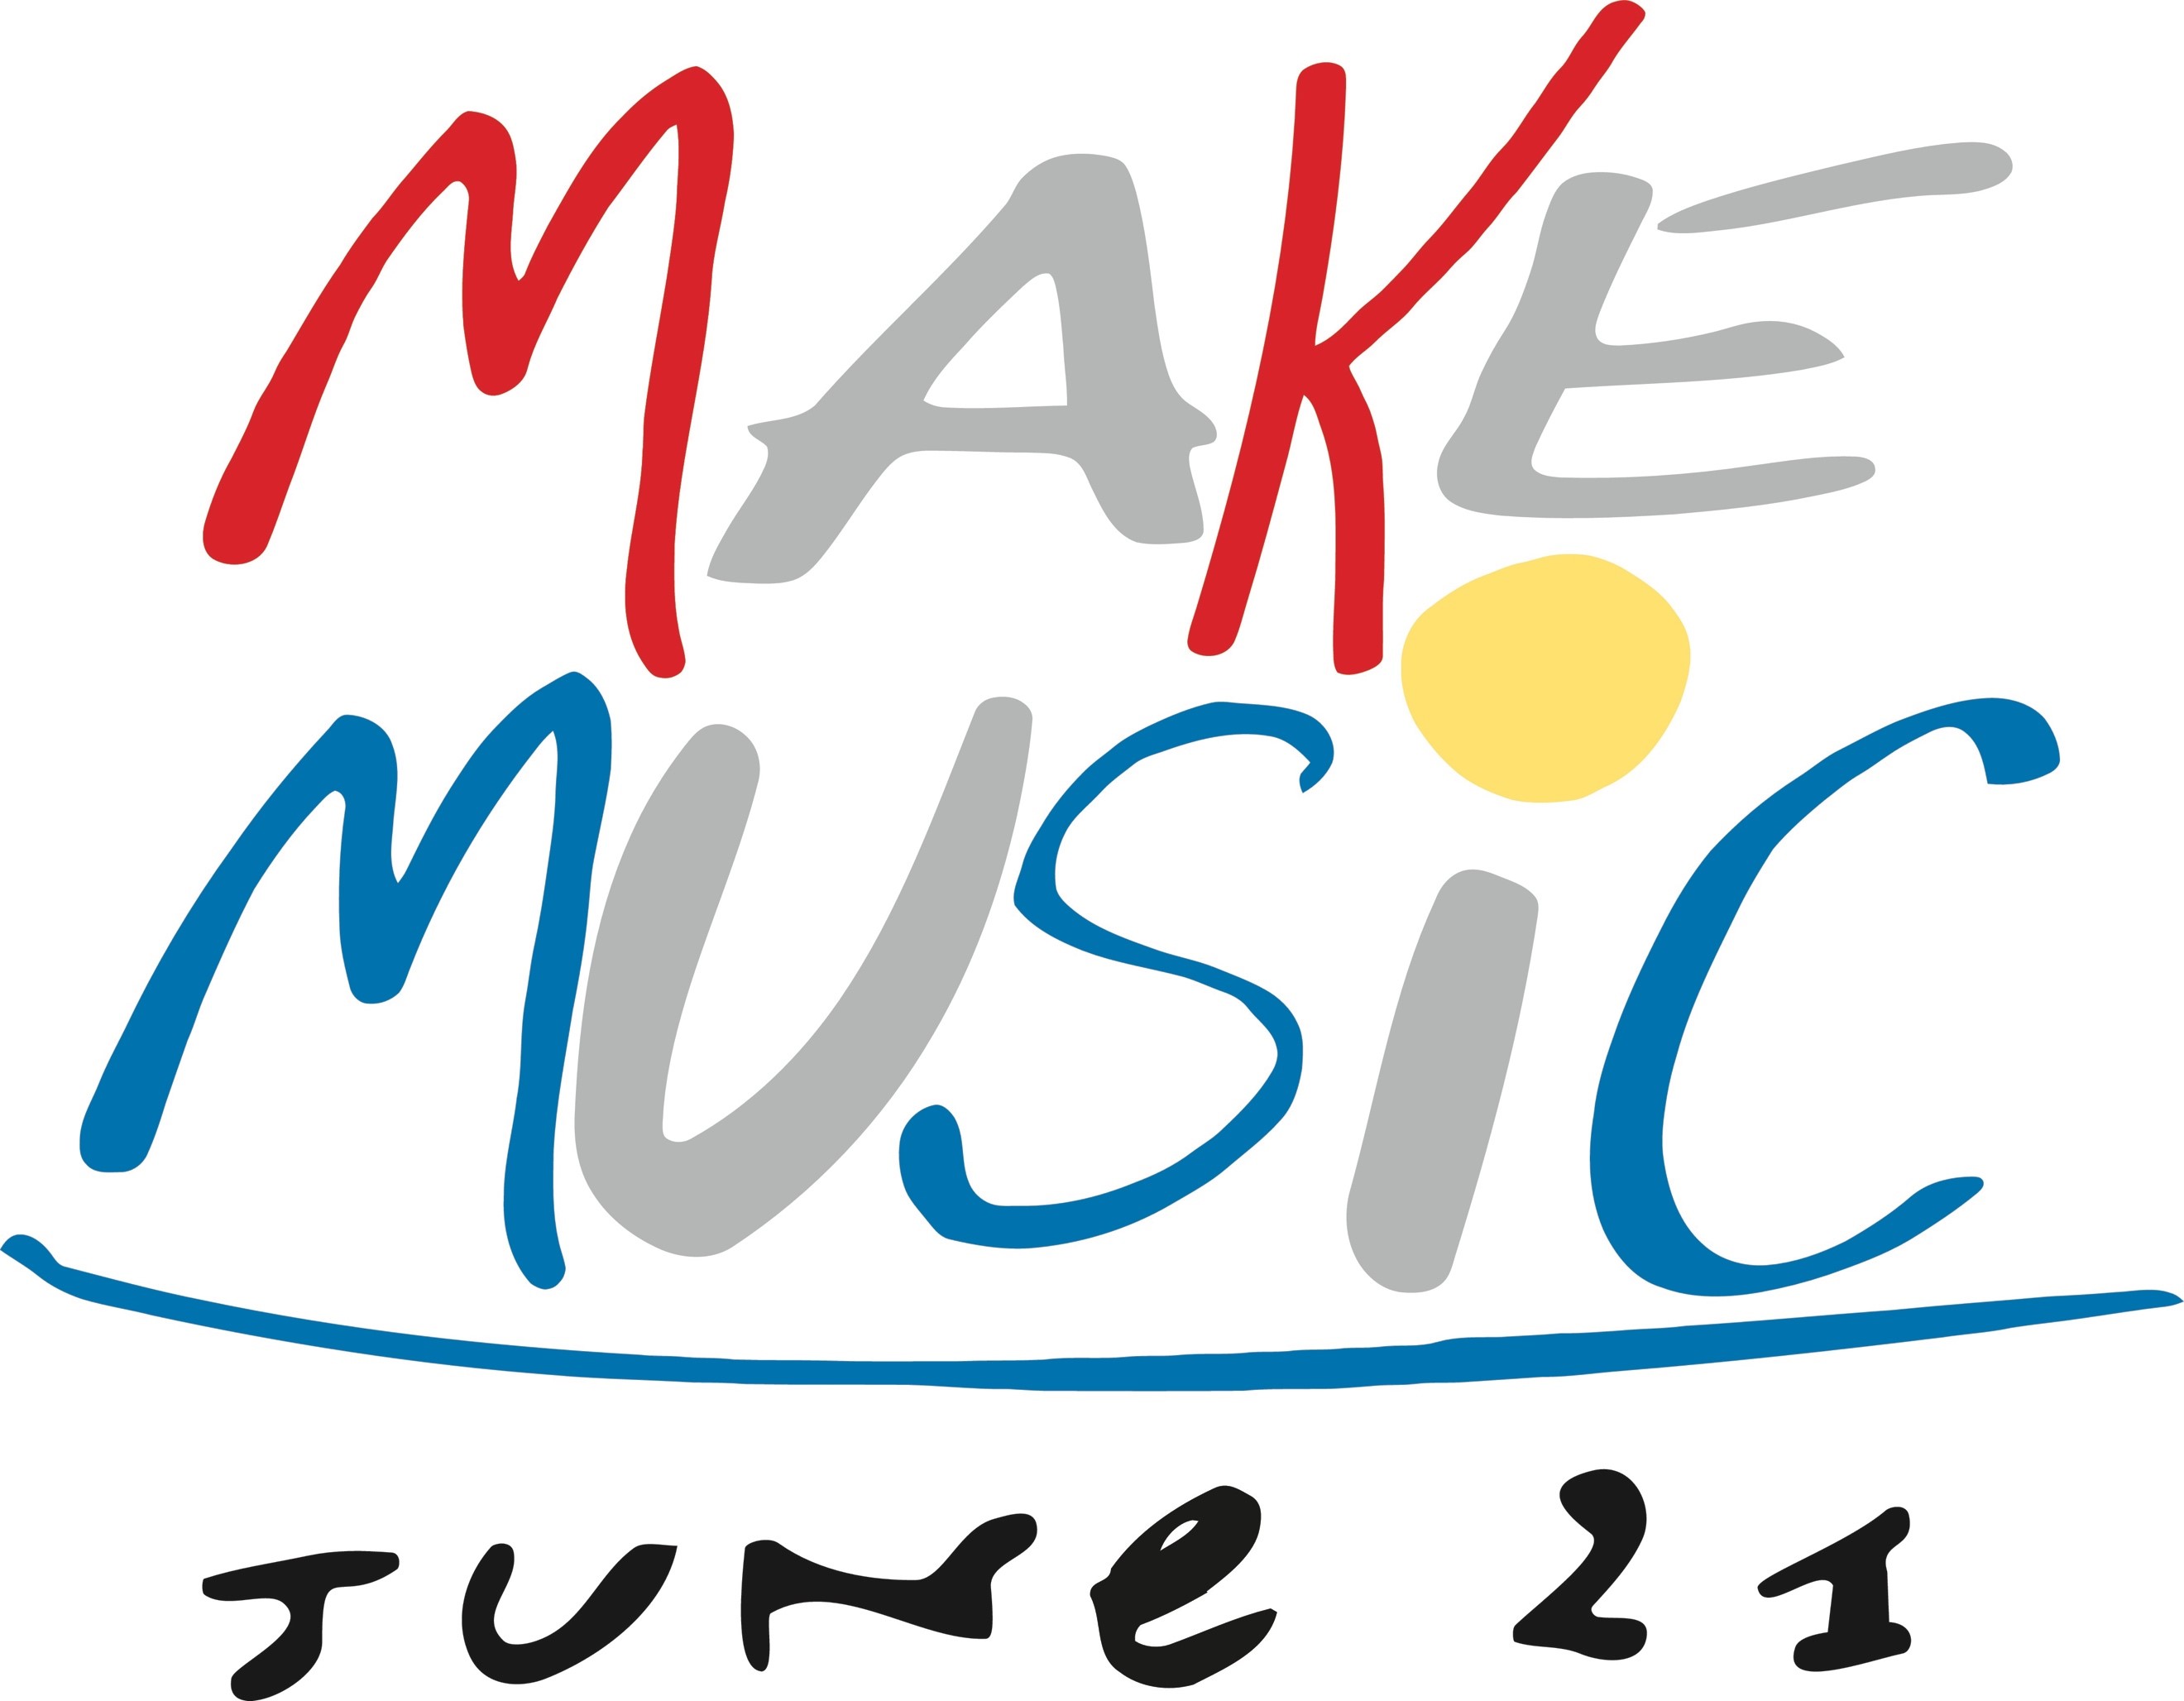 Make Music Day 2018 is June 21